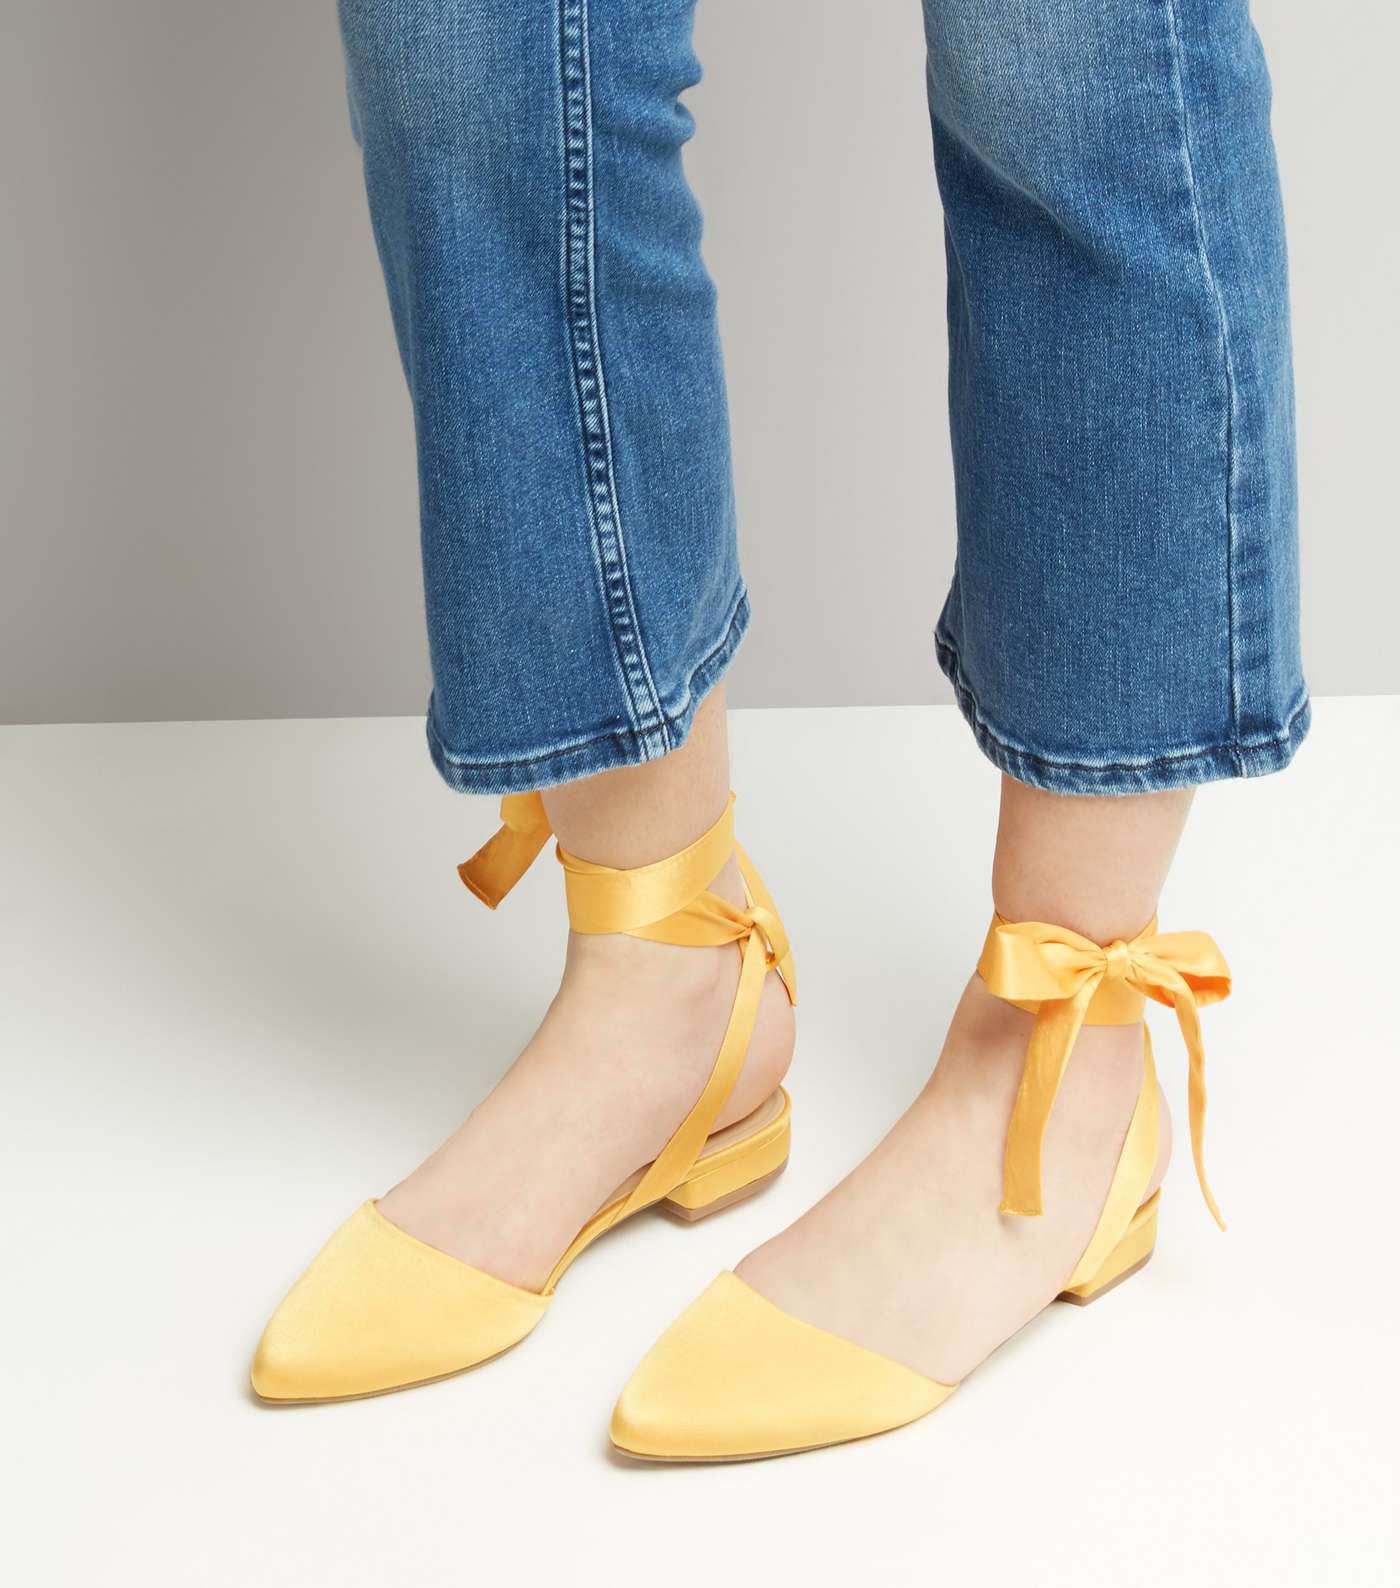 Wide Fit Yellow Satin Ankle Tie Sandals Image 2